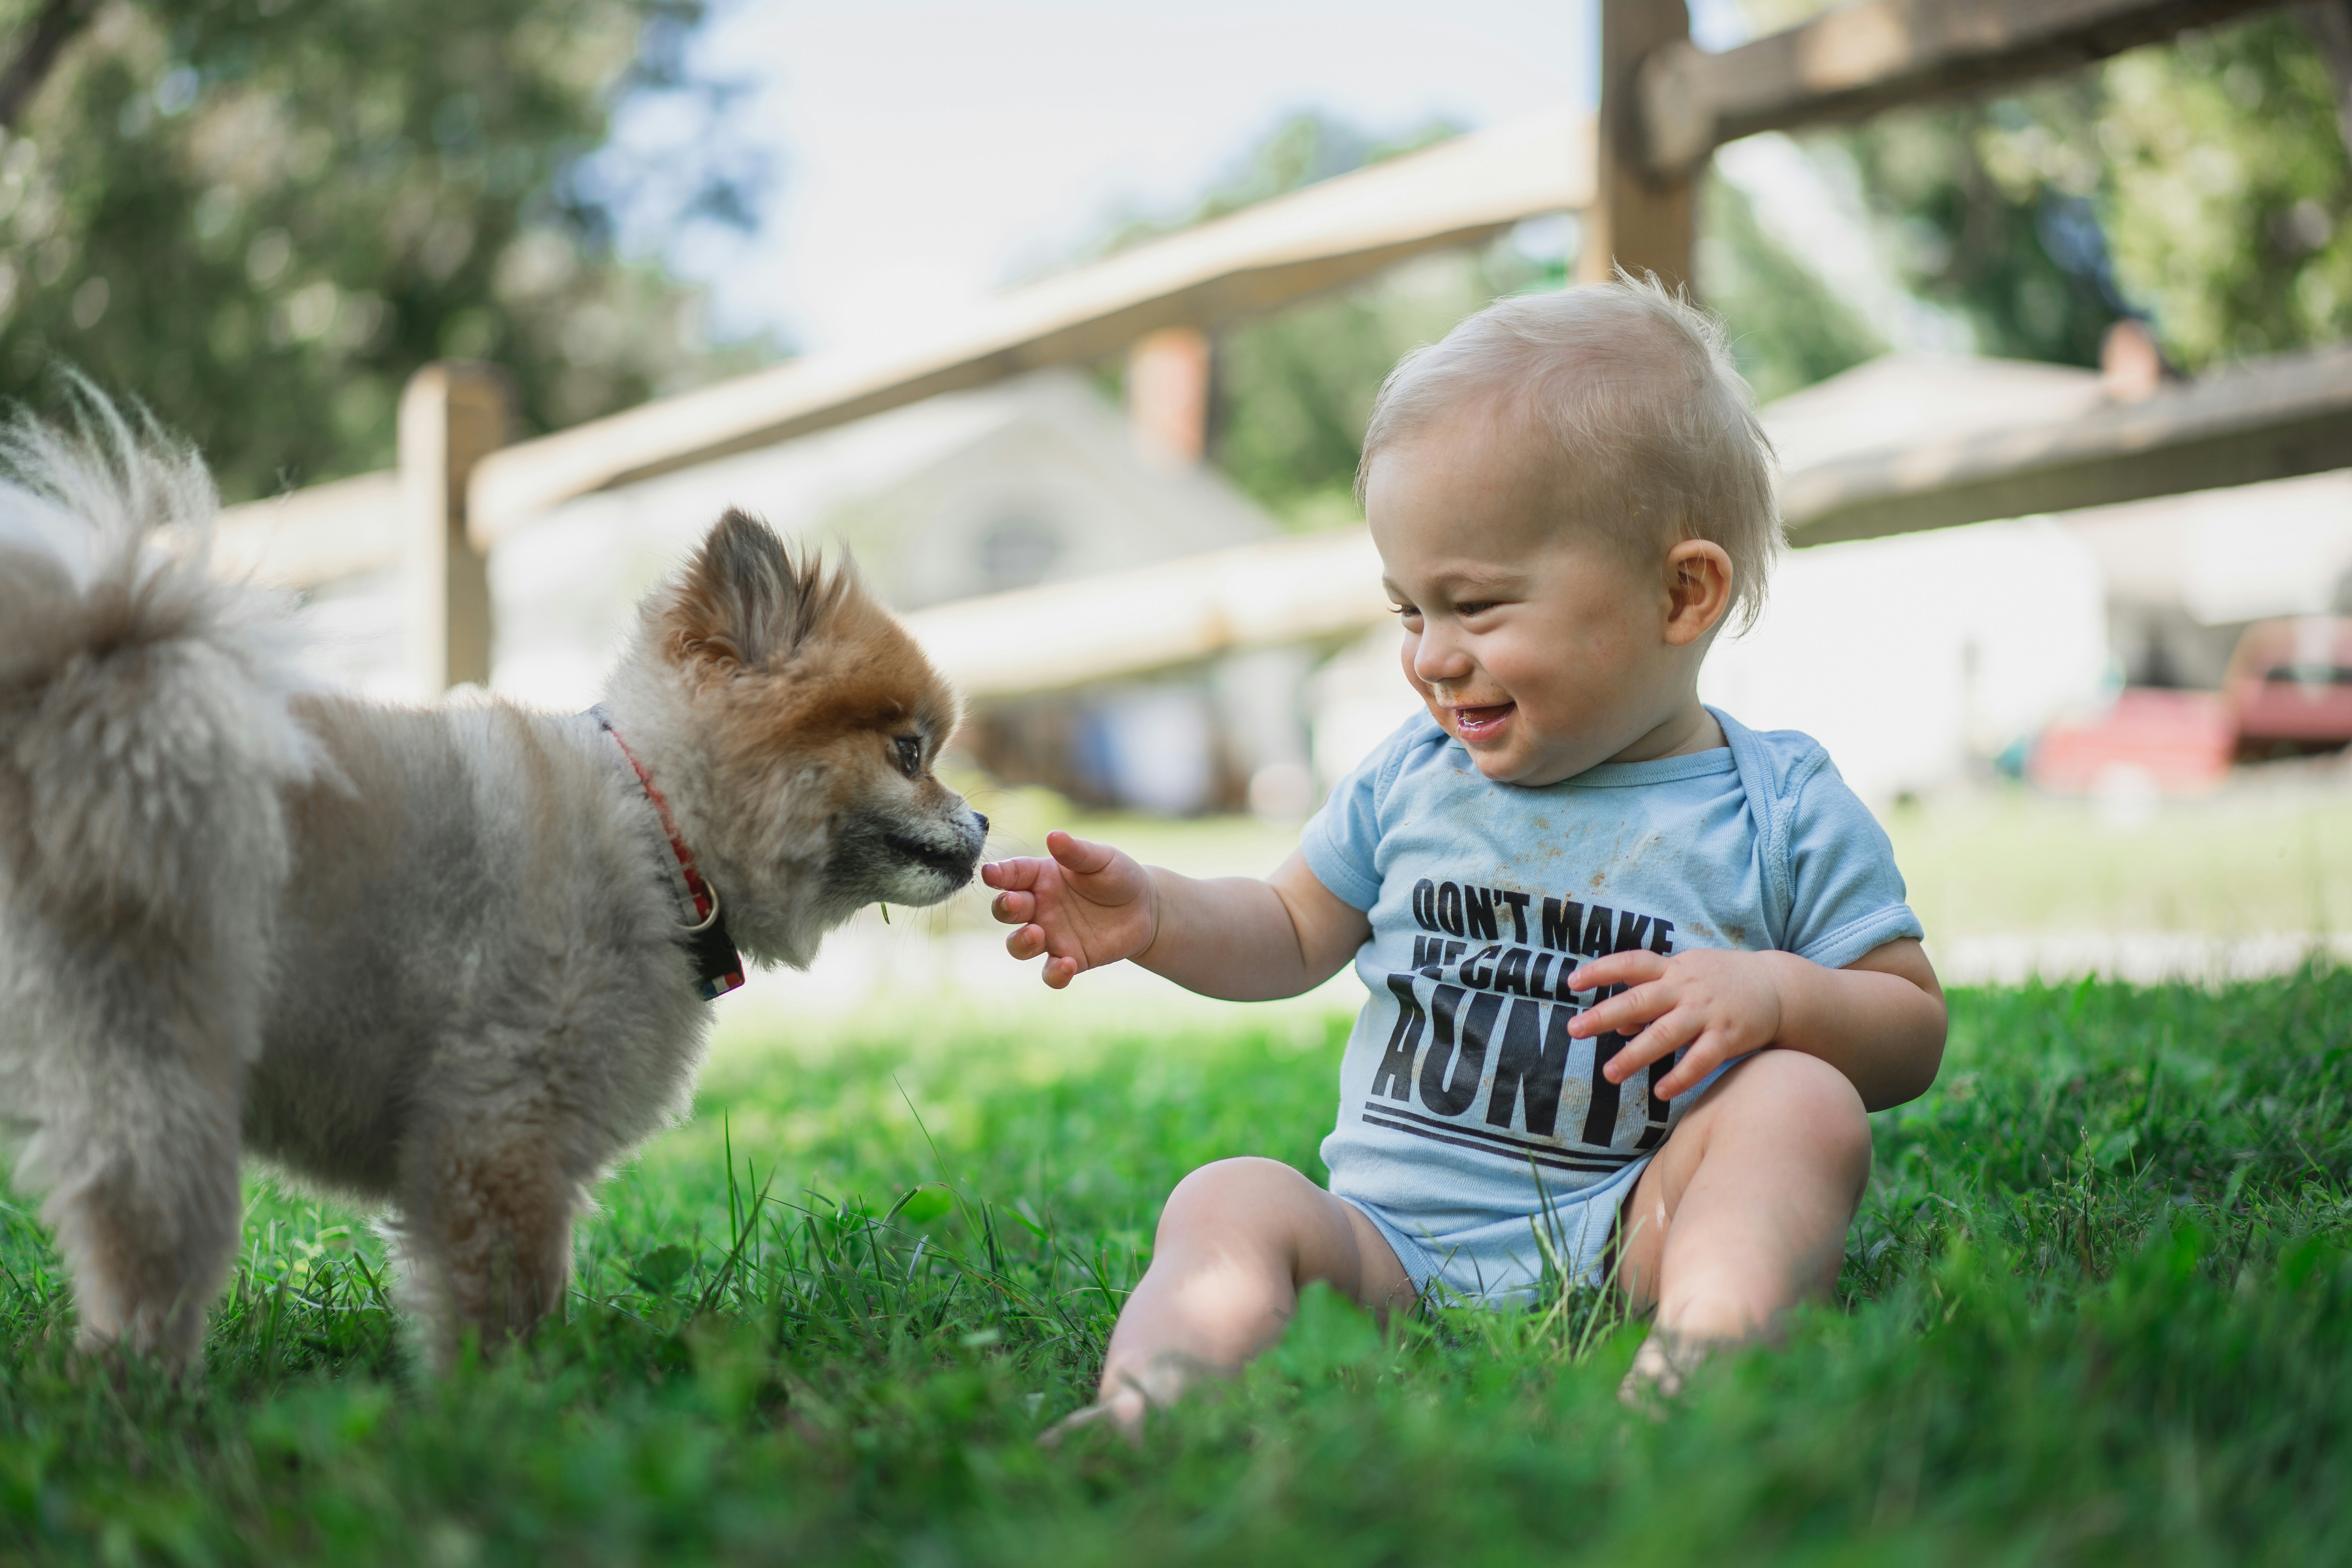 small dog and baby together outside on grass